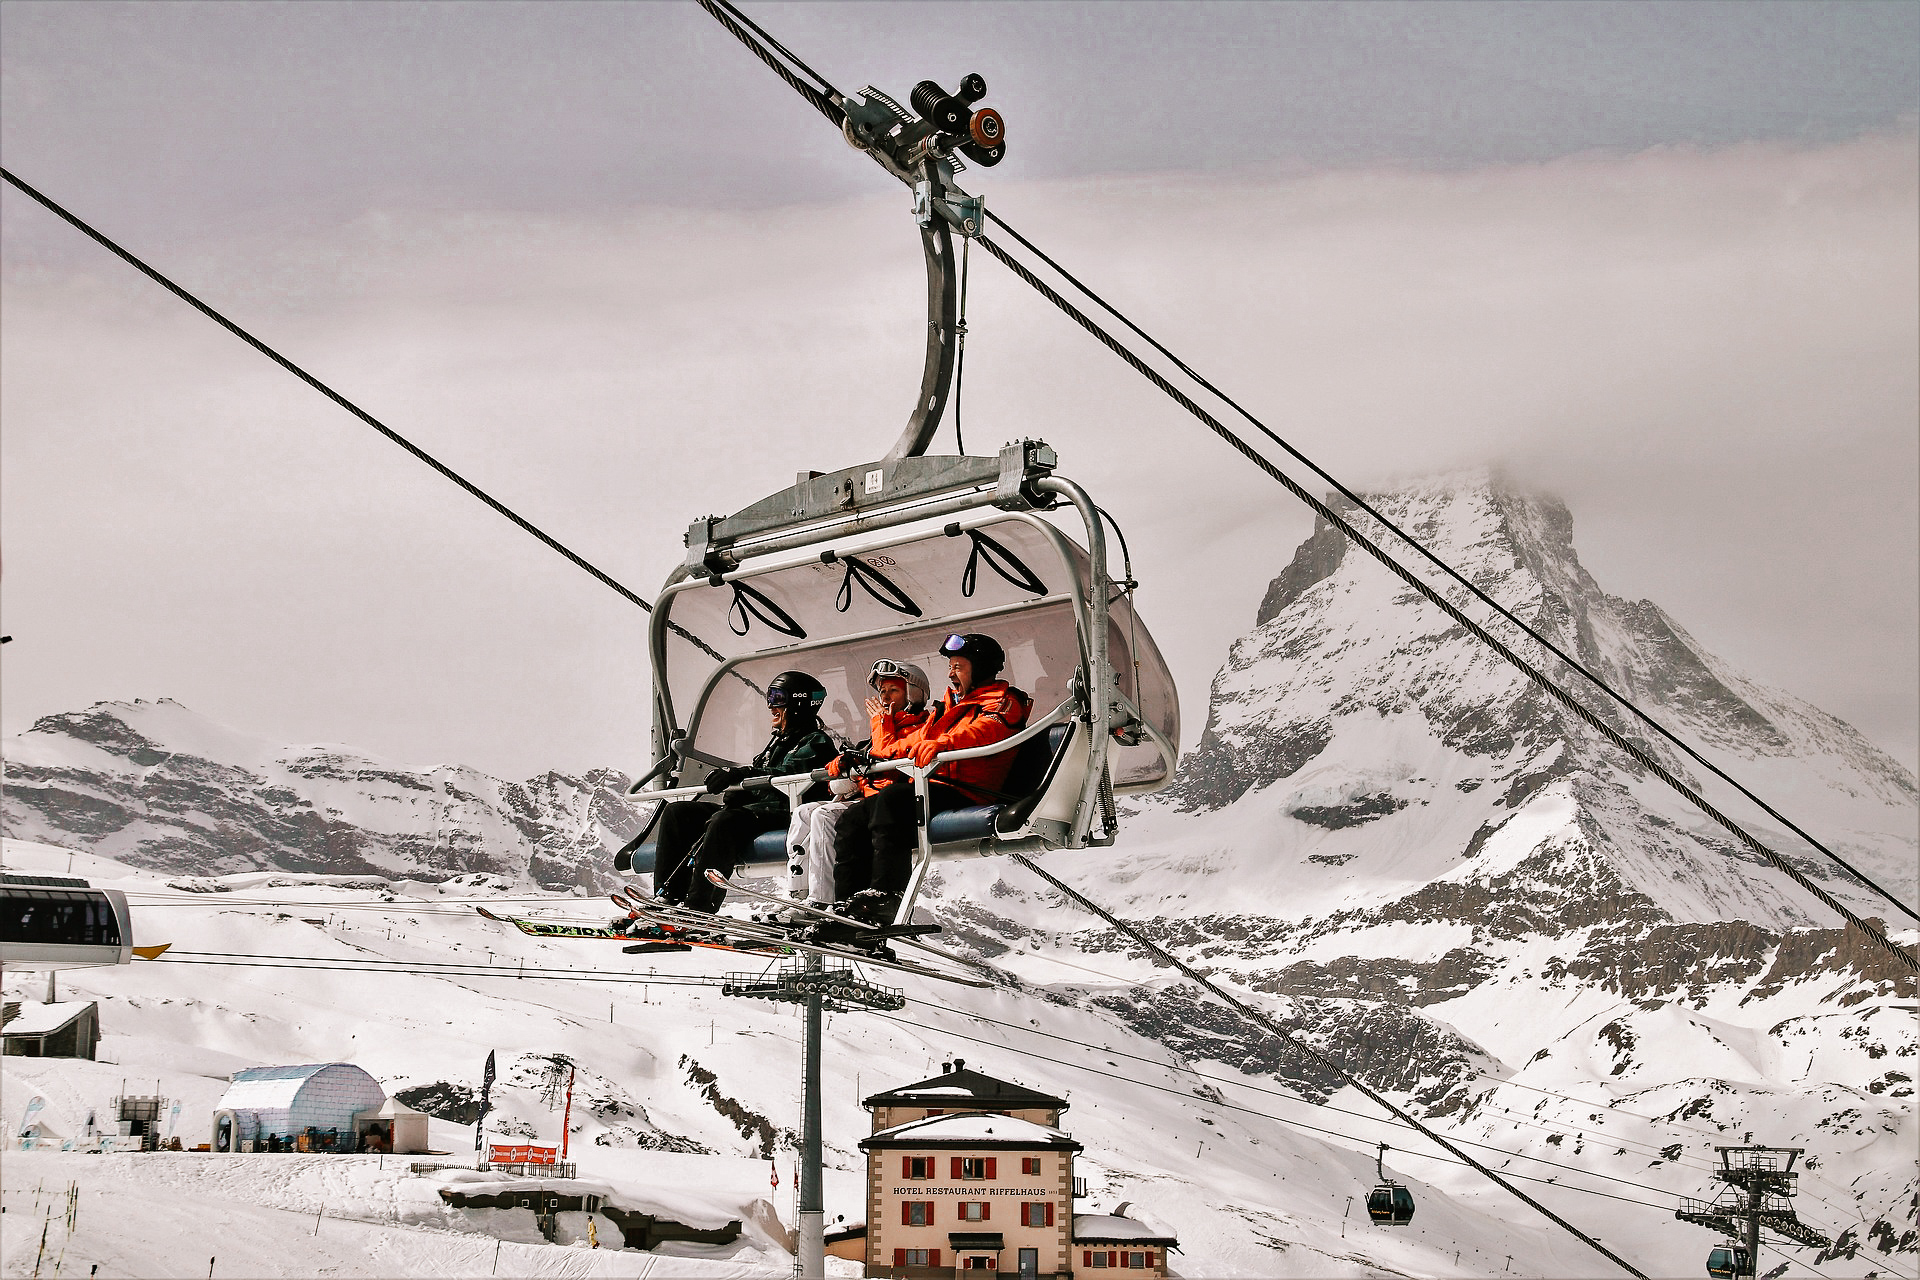 A single ski lift taking three people up the side of the mountain, with Matterhorn peak in the background with the tip covered in clouds.